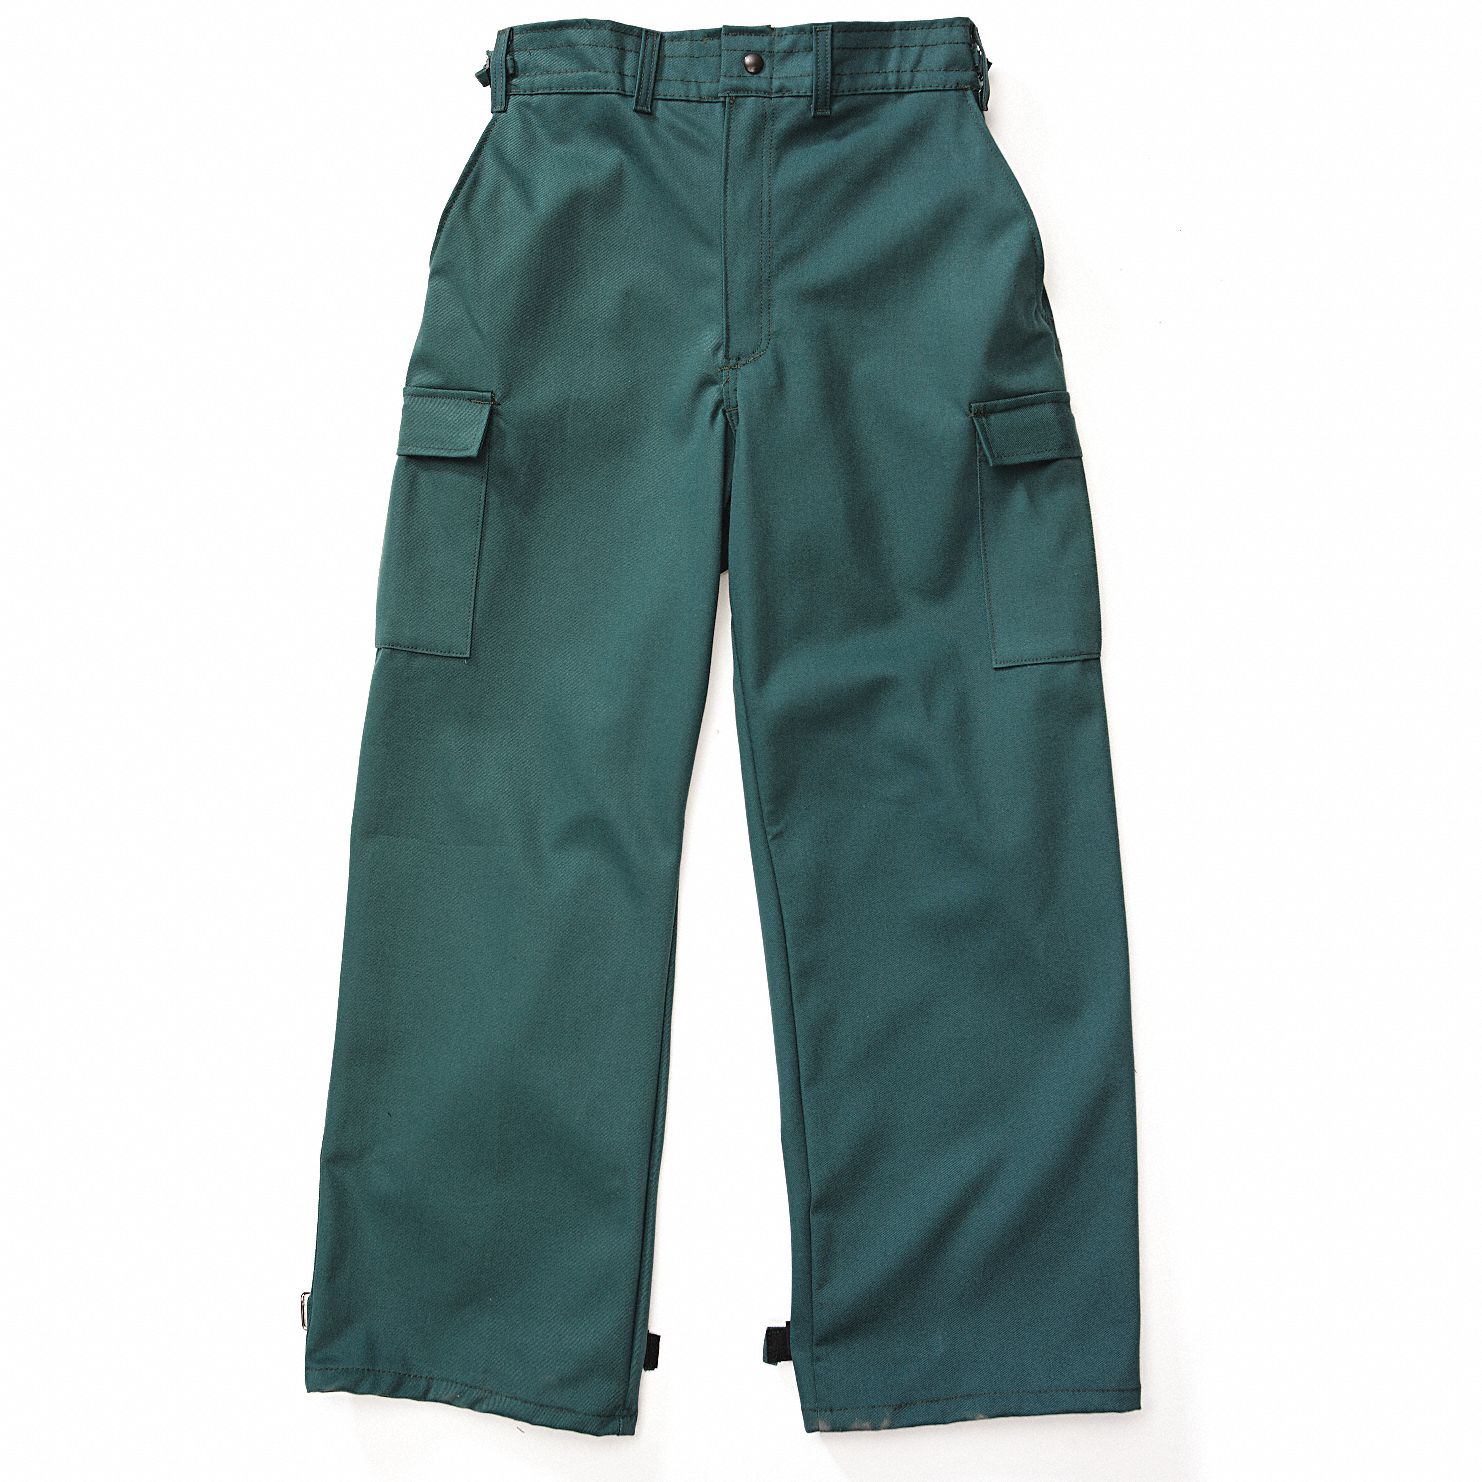 Wildland Fire Pants: M, 31 to 35 in Fits Waist Size, 32 in Inseam, Green